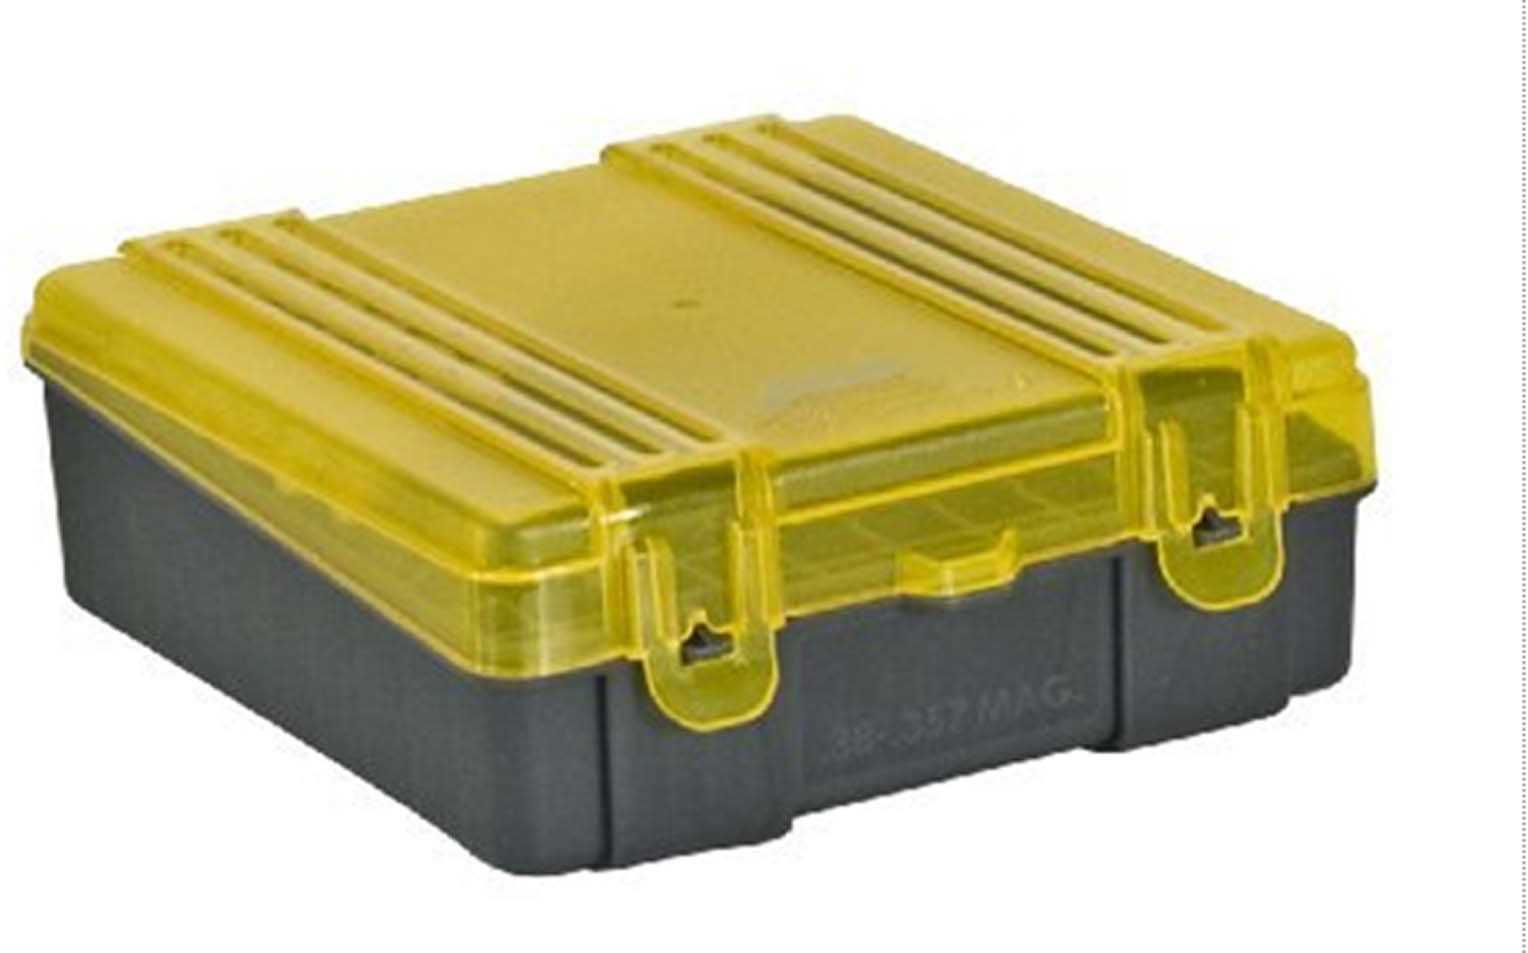 Plano Cases Ammunition Box .38/.357 Caliber Holds 100 Rounds Flip Top Md: 122500